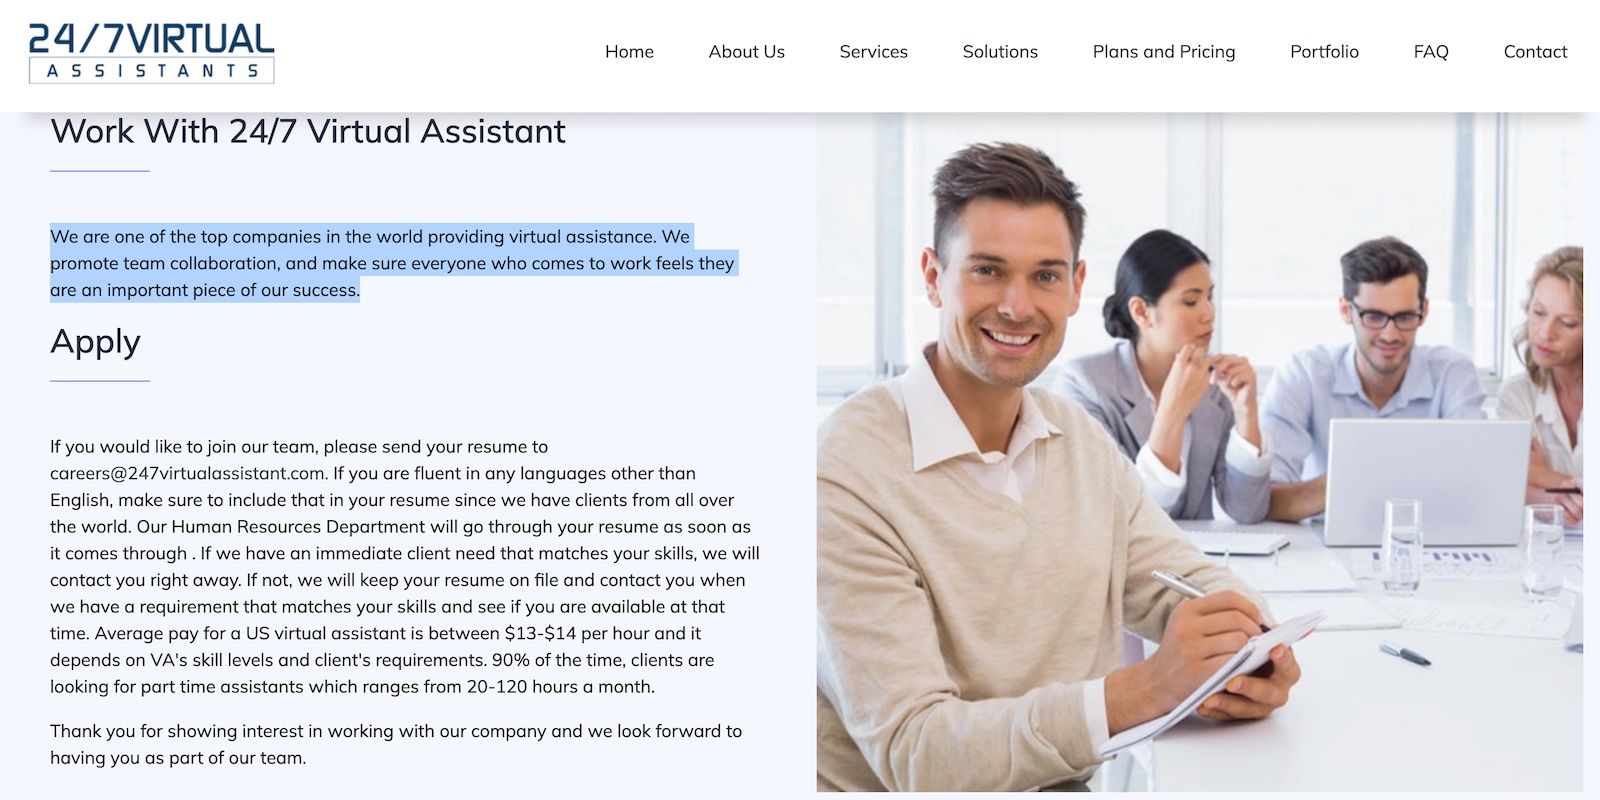 Qualifications for Applying for 24:7 Virtual Assistants